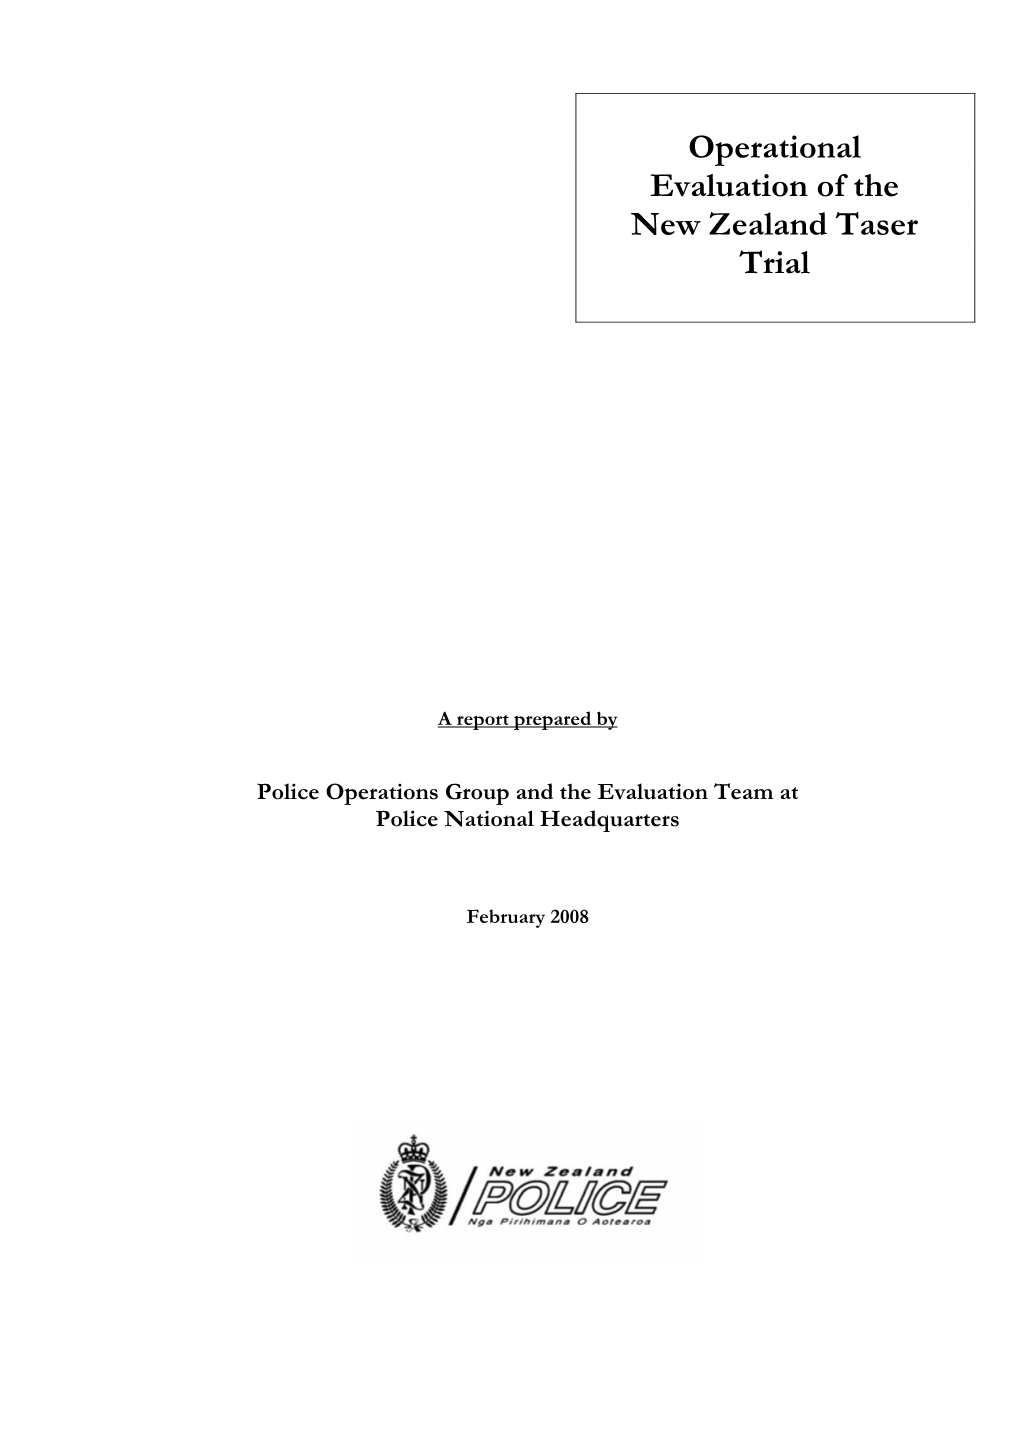 Operational Evaluation of the New Zealand Taser Trial